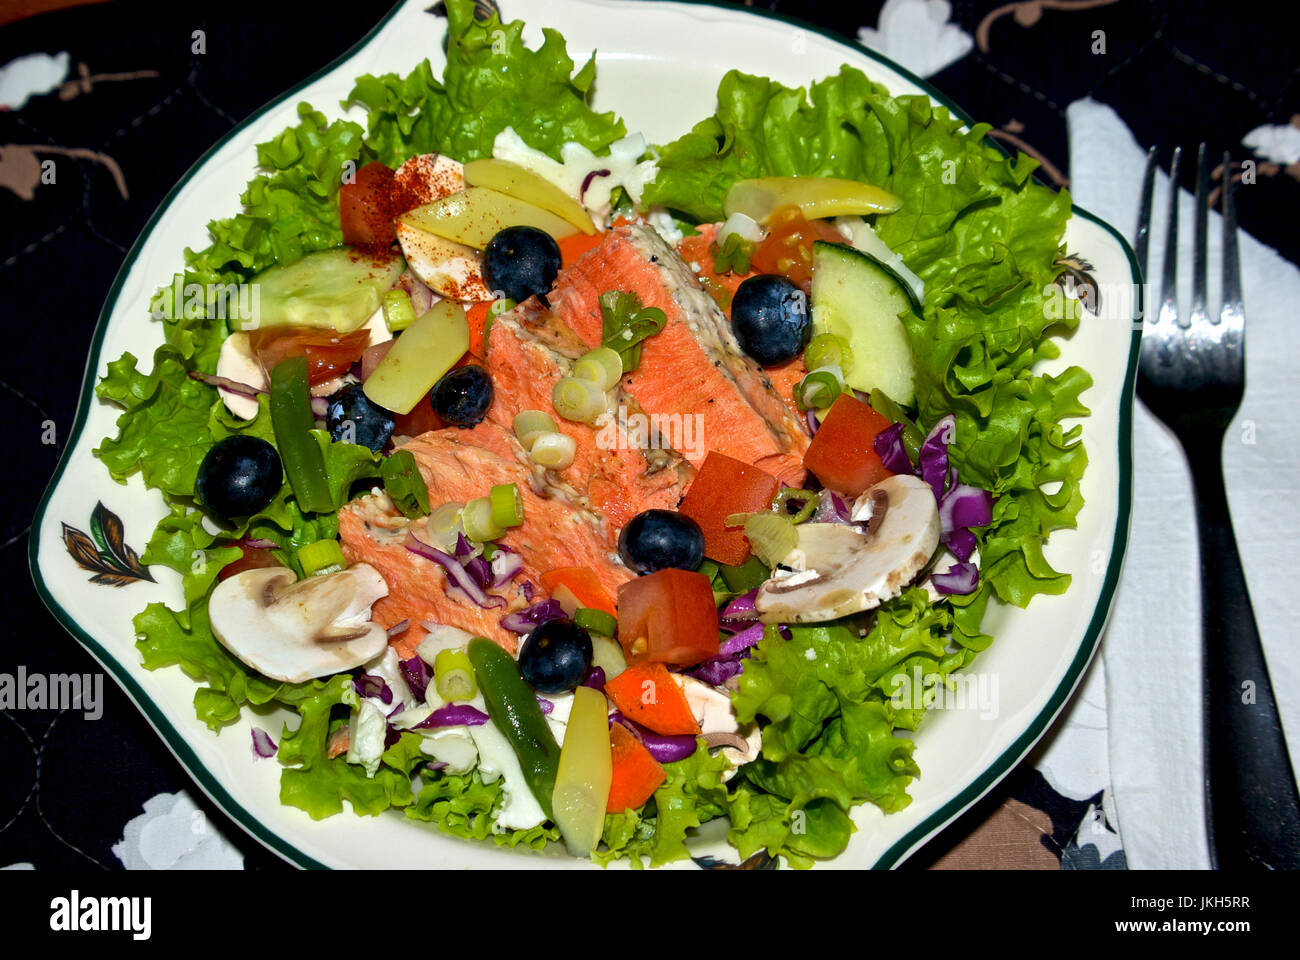 Barbecued salmon salad with blueberries, green beans, carrots mushrooms, cucumber, tomatoes, lettuce, red cabbage Stock Photo